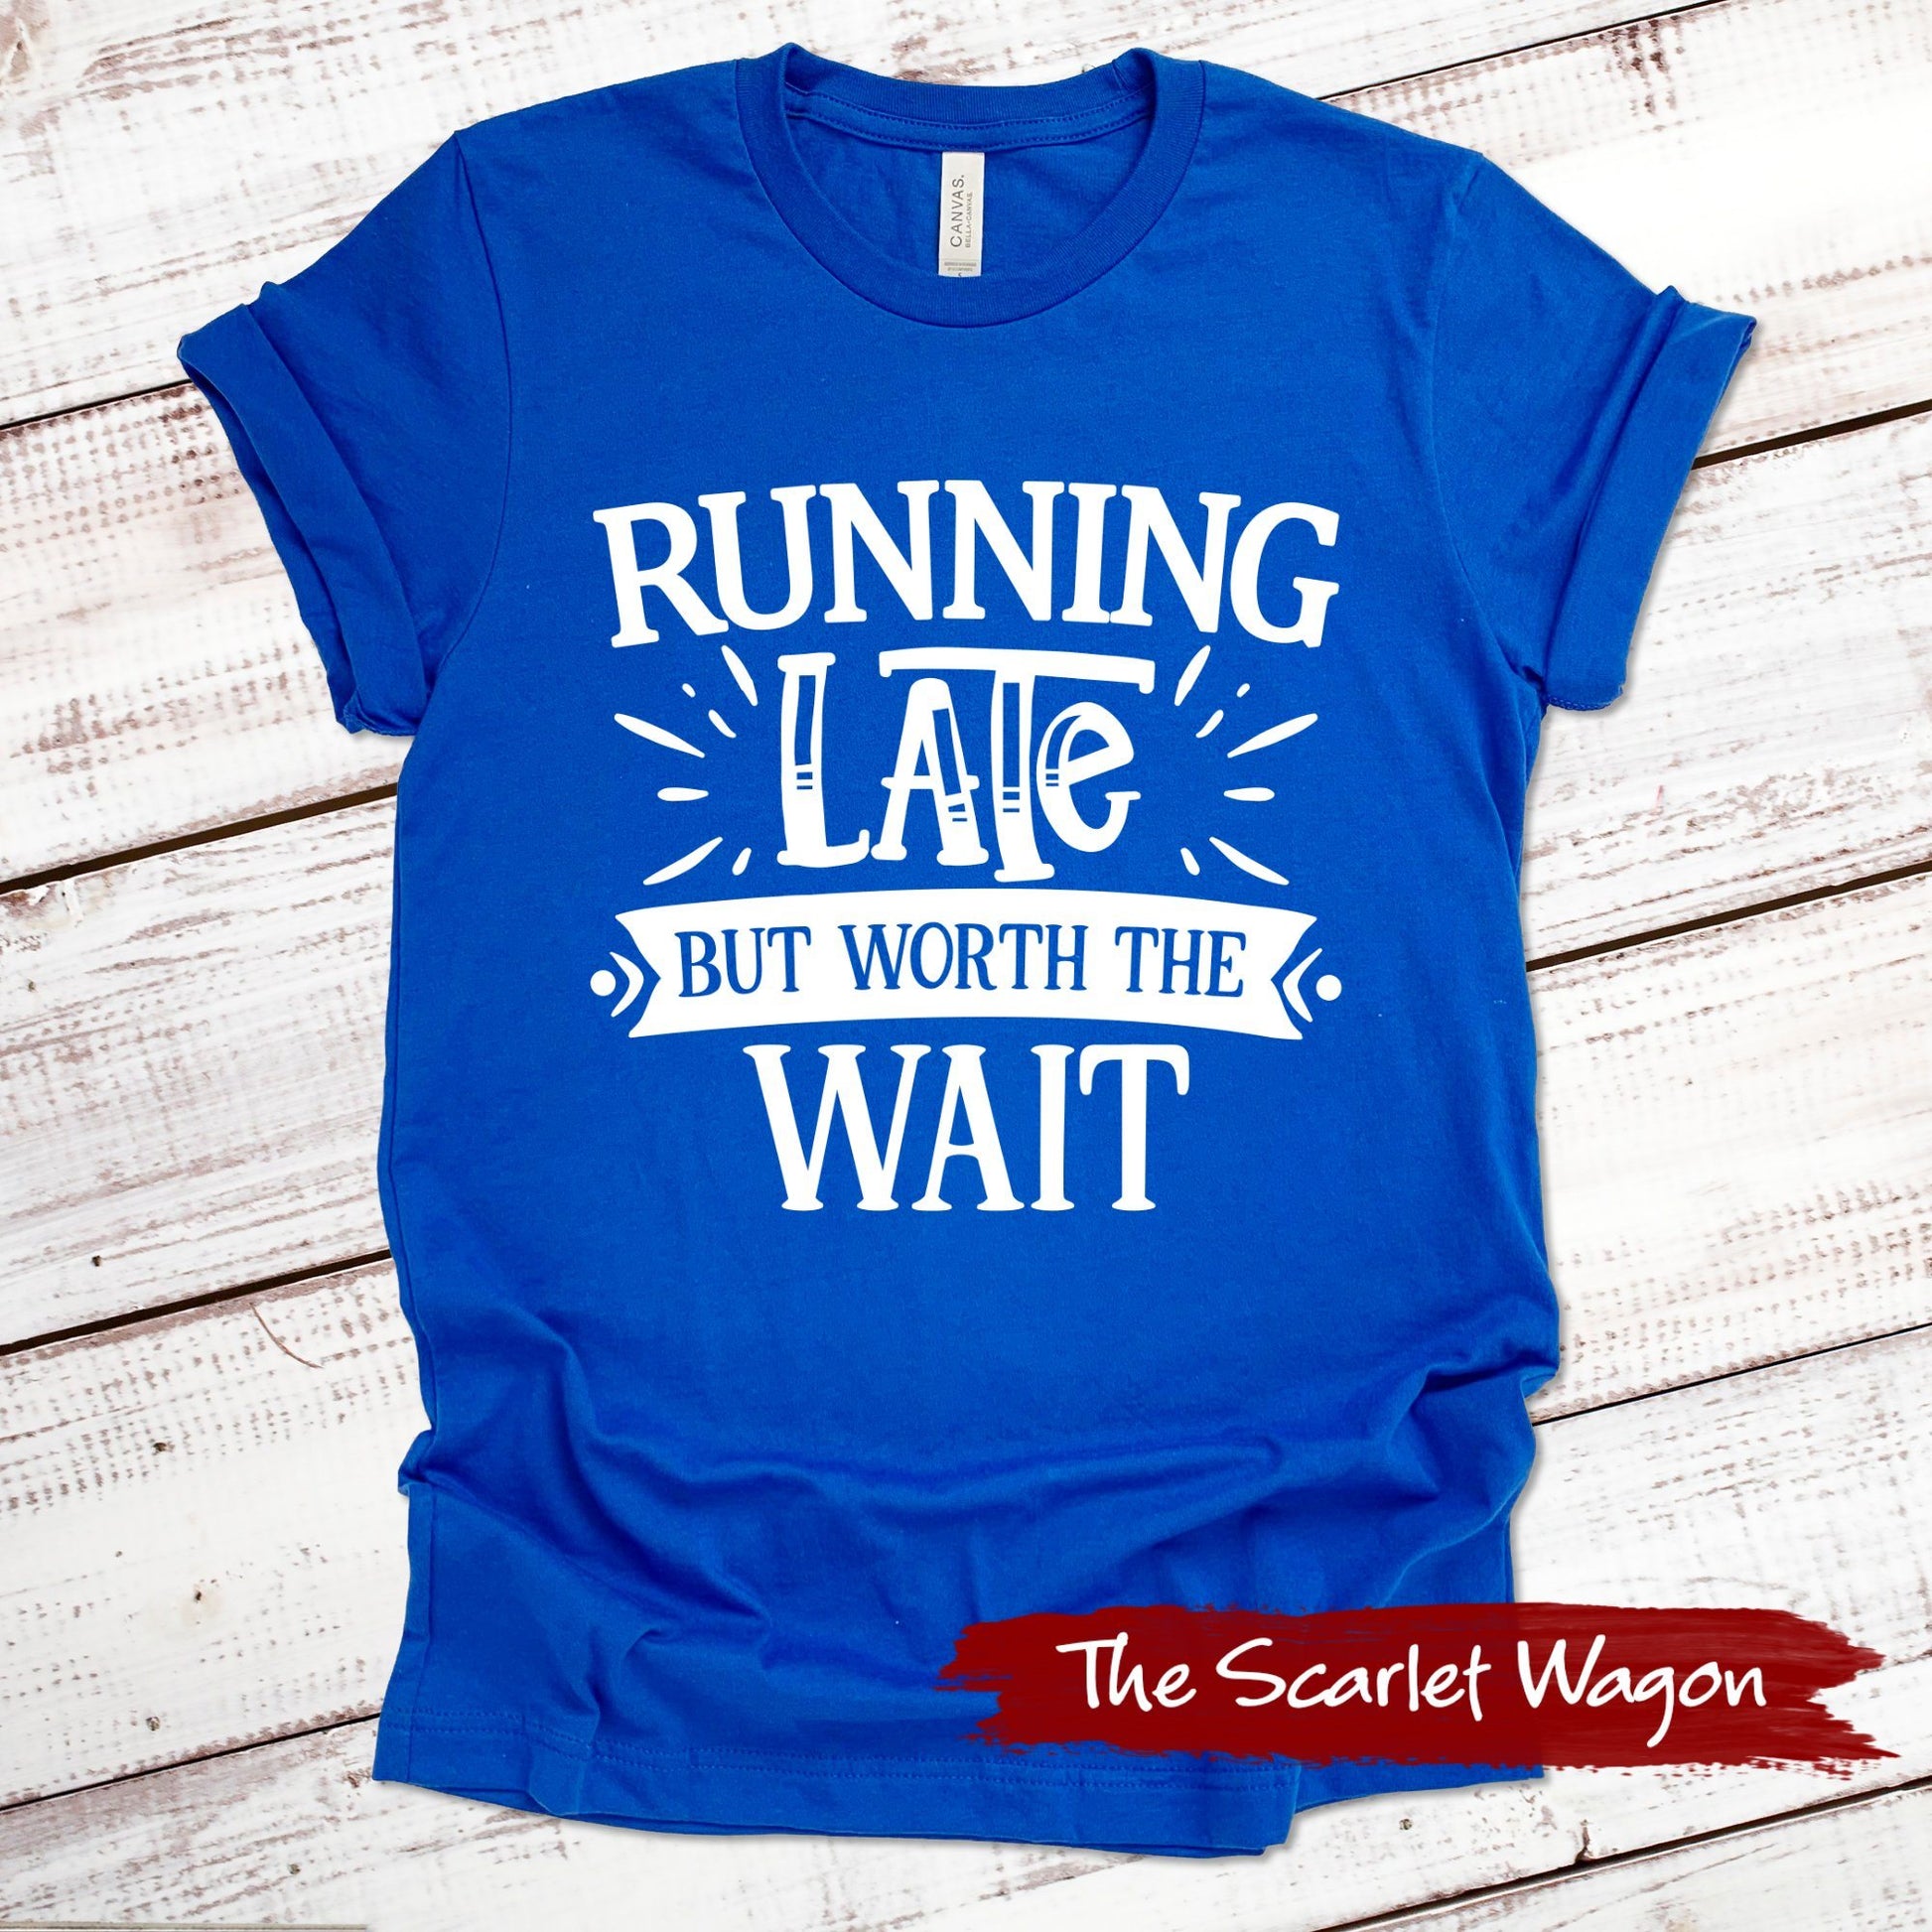 Running Late But Worth the Wait Funny Shirt Scarlet Wagon True Royal XS 